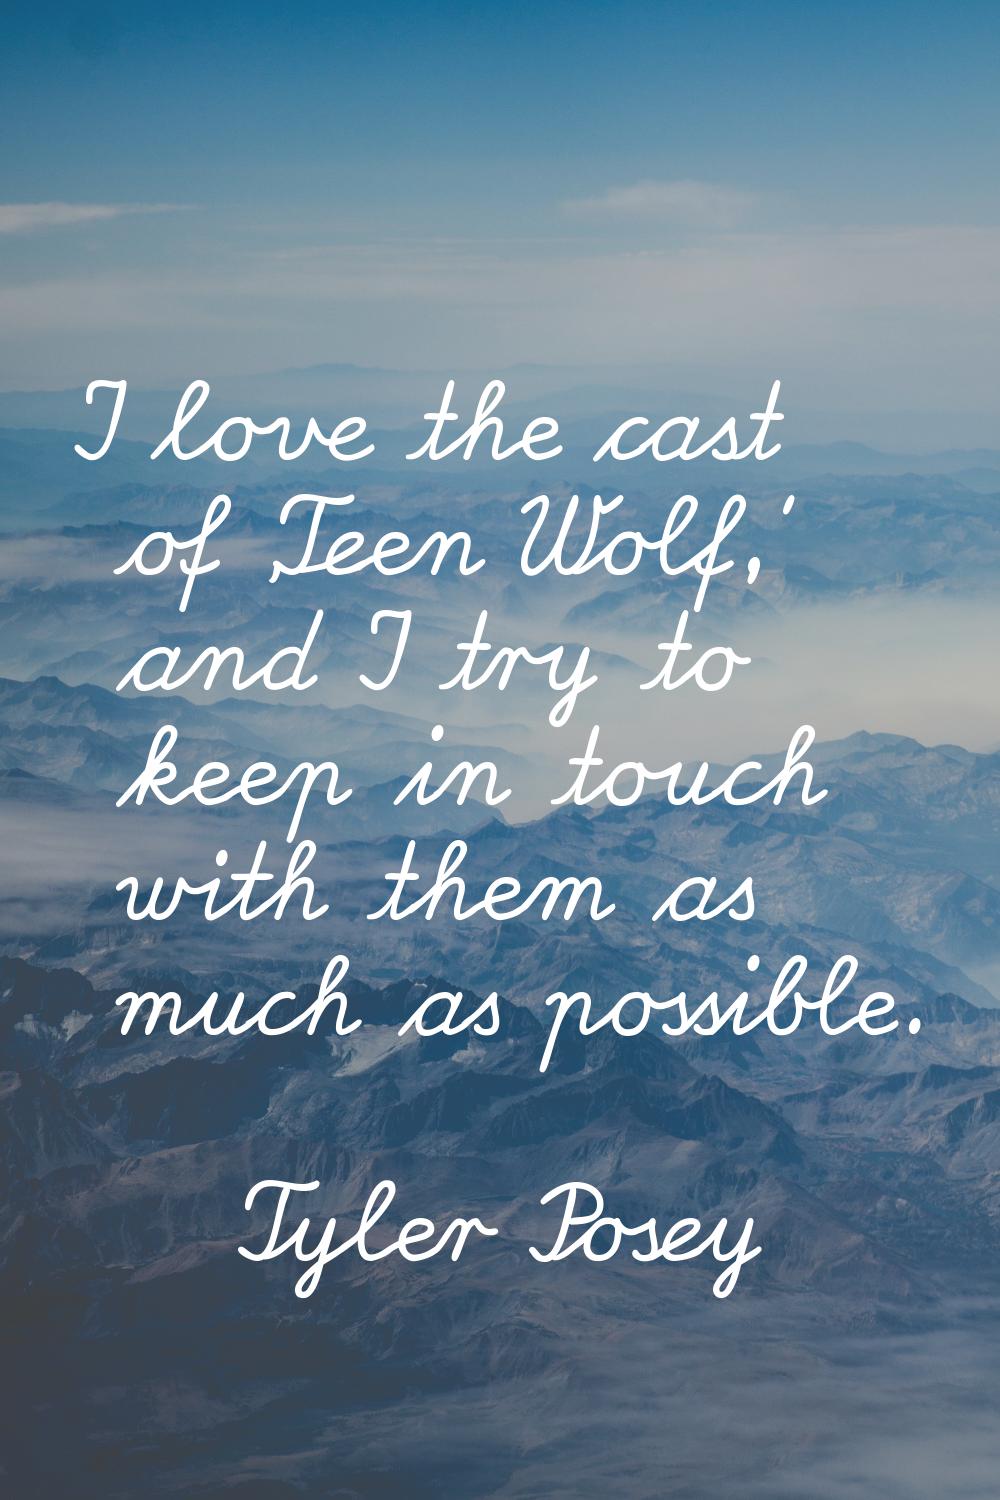 I love the cast of 'Teen Wolf,' and I try to keep in touch with them as much as possible.